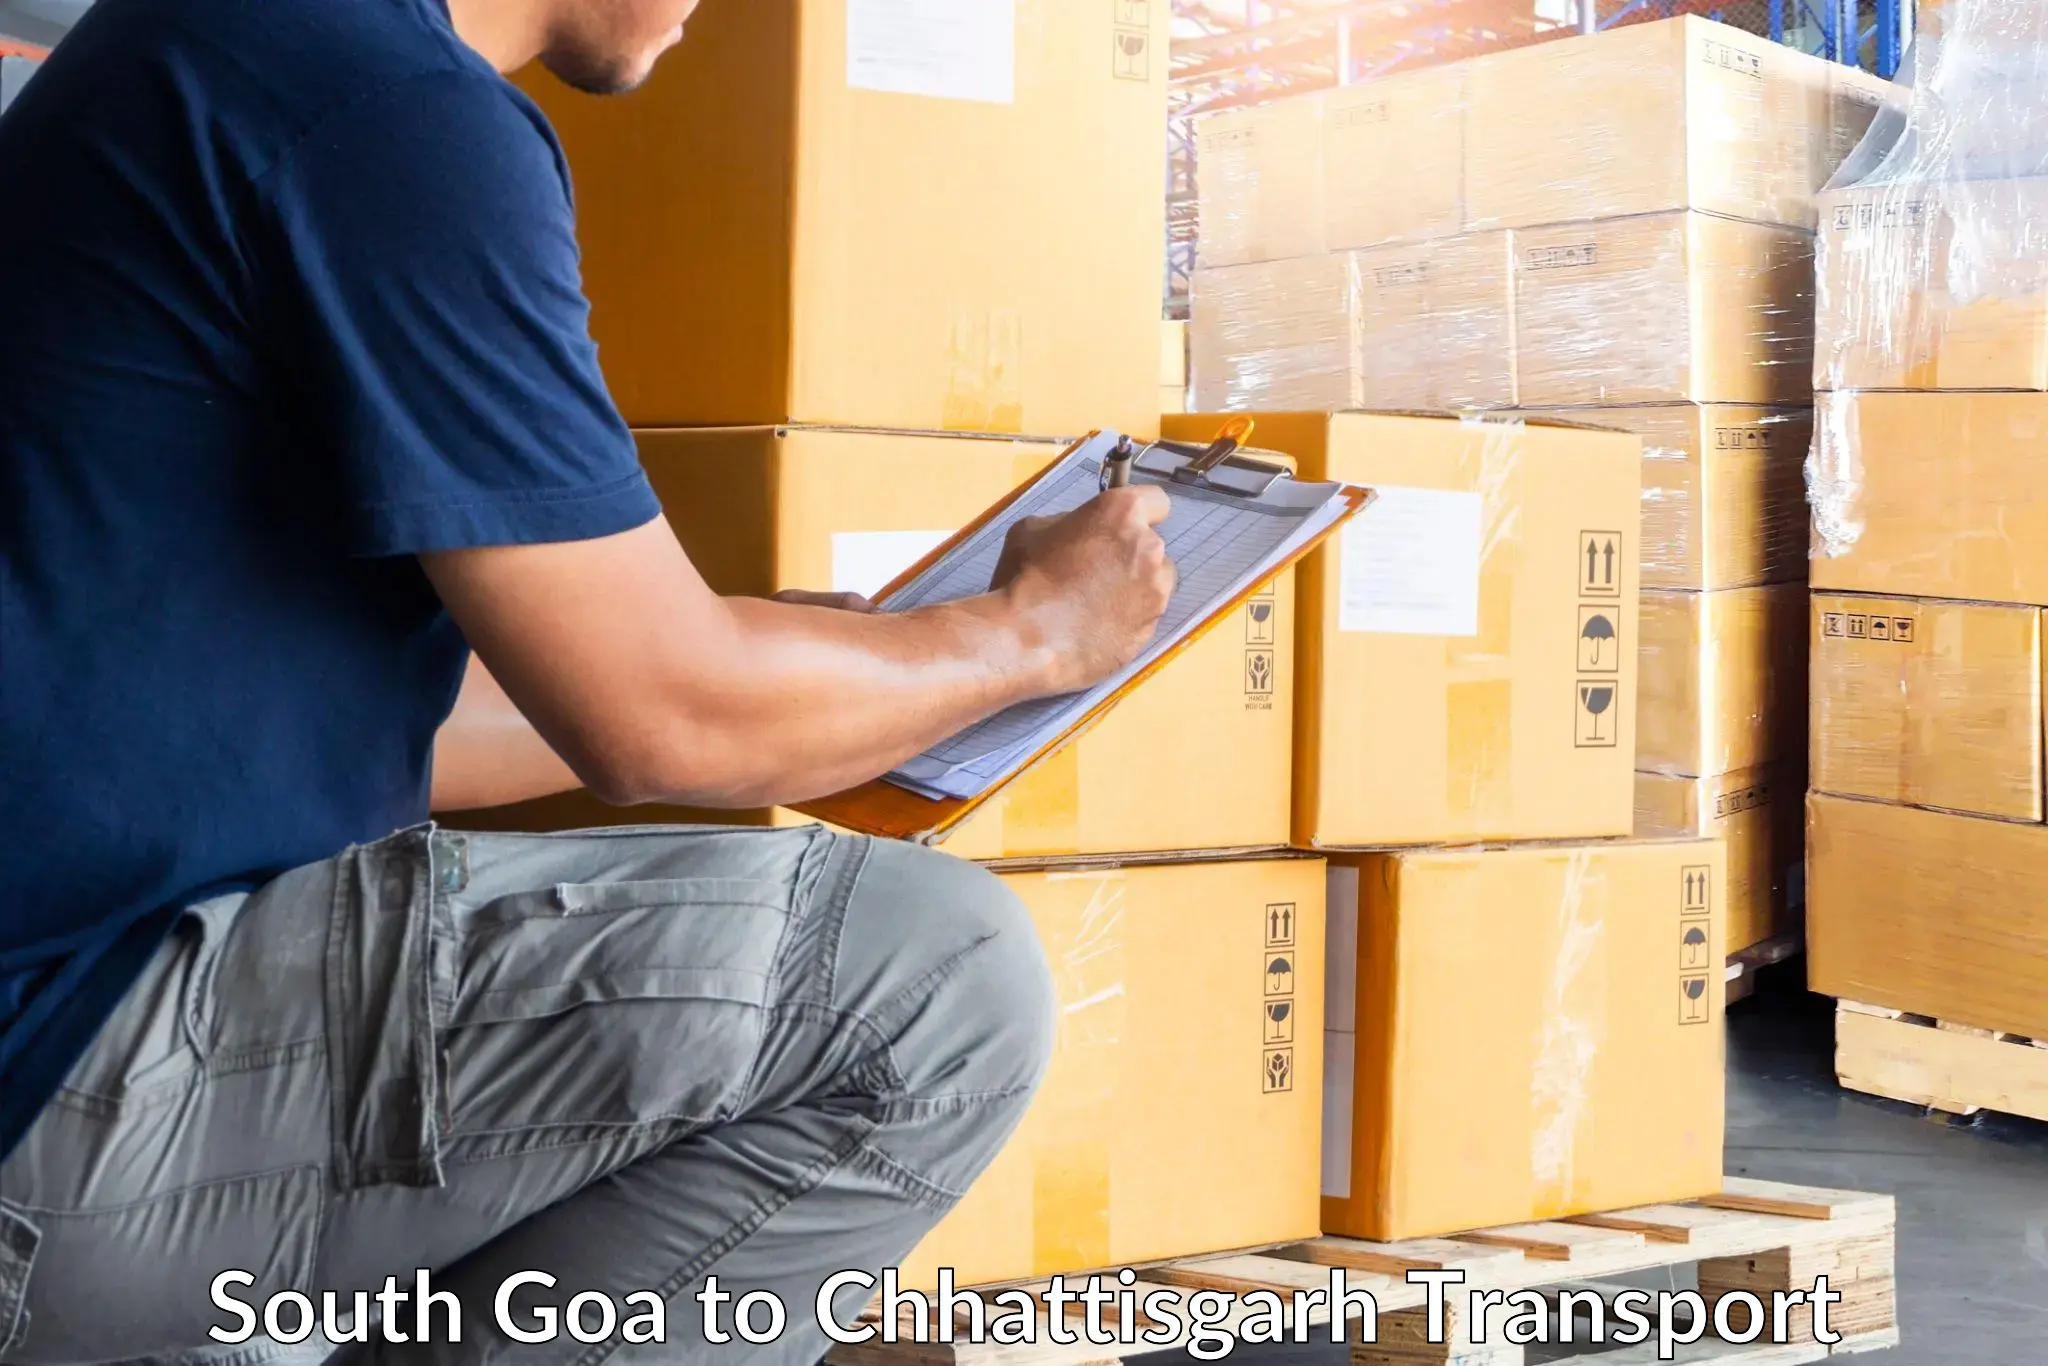 Air freight transport services in South Goa to Chhattisgarh